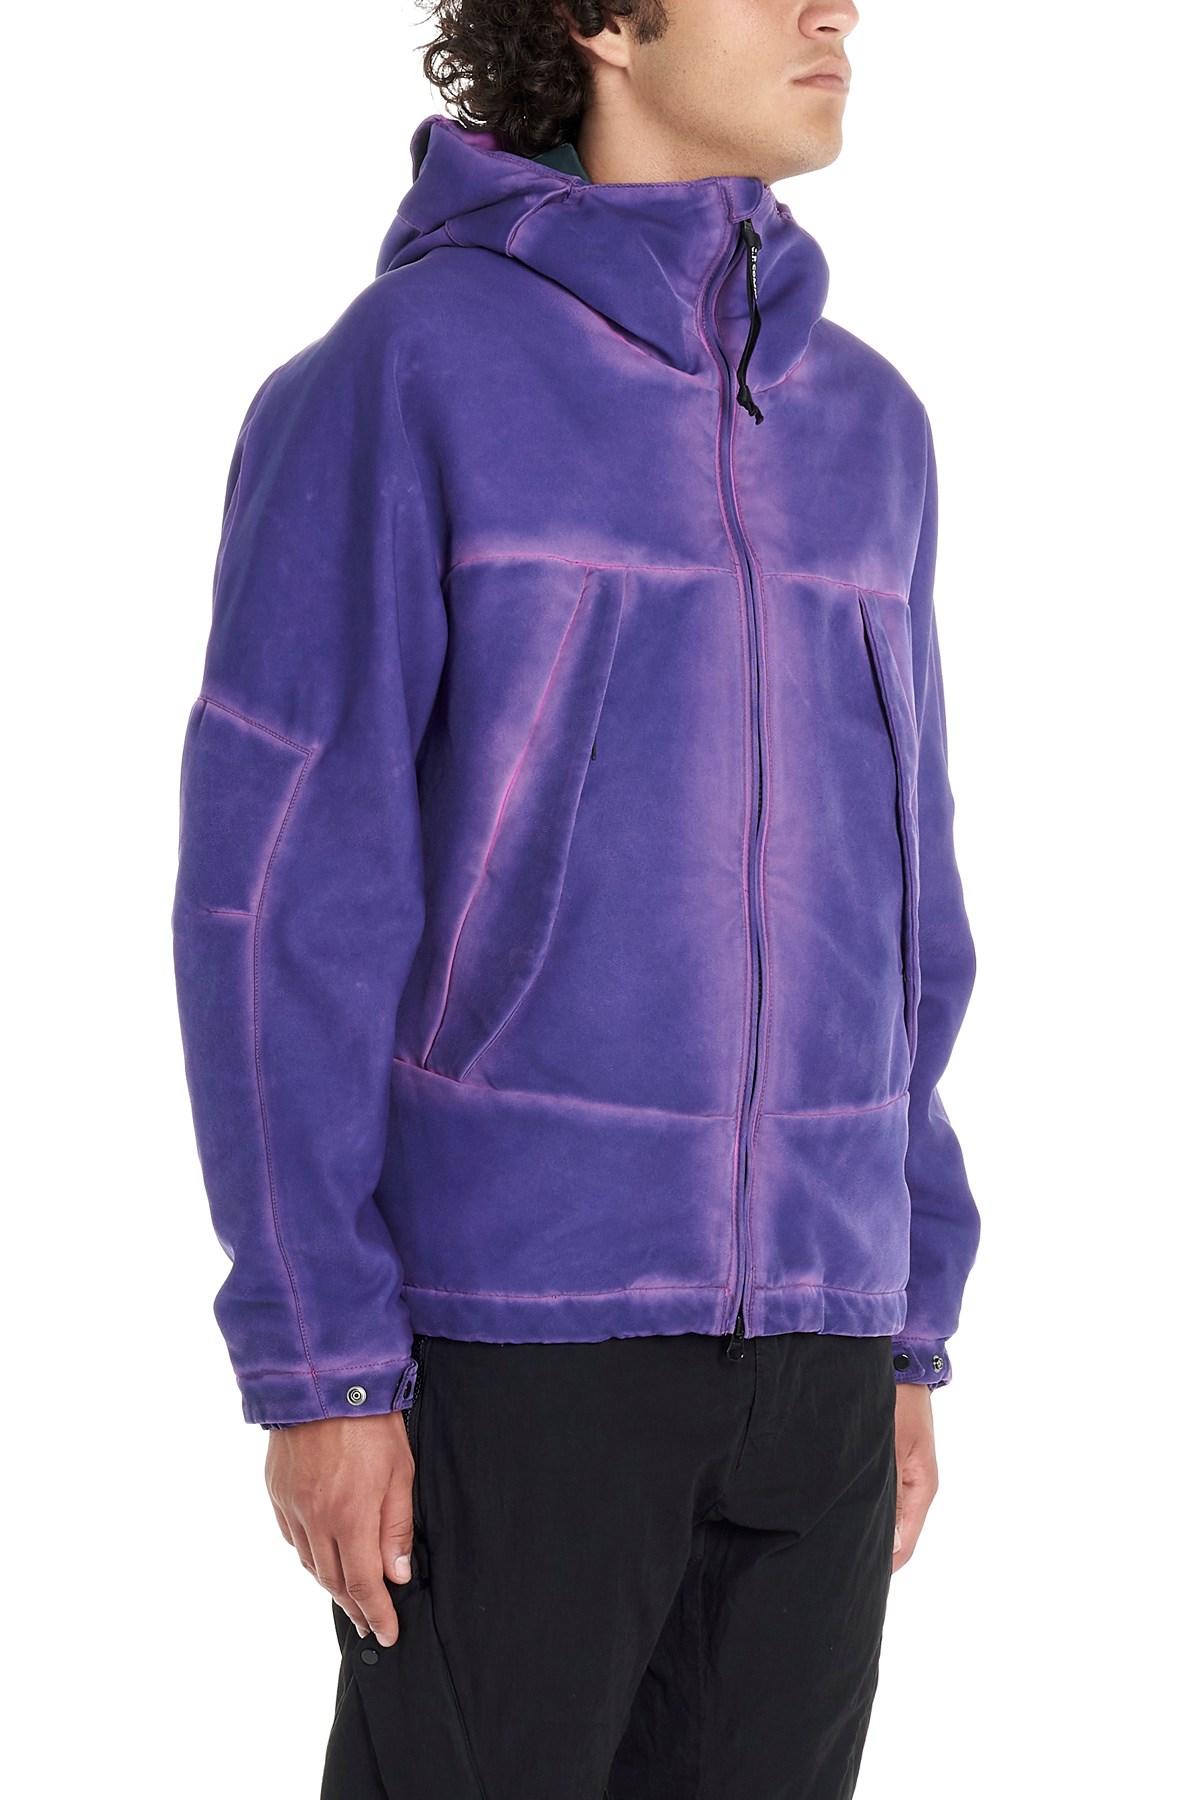 C.P. Company 'military' Jacket in Purple for Men | Lyst